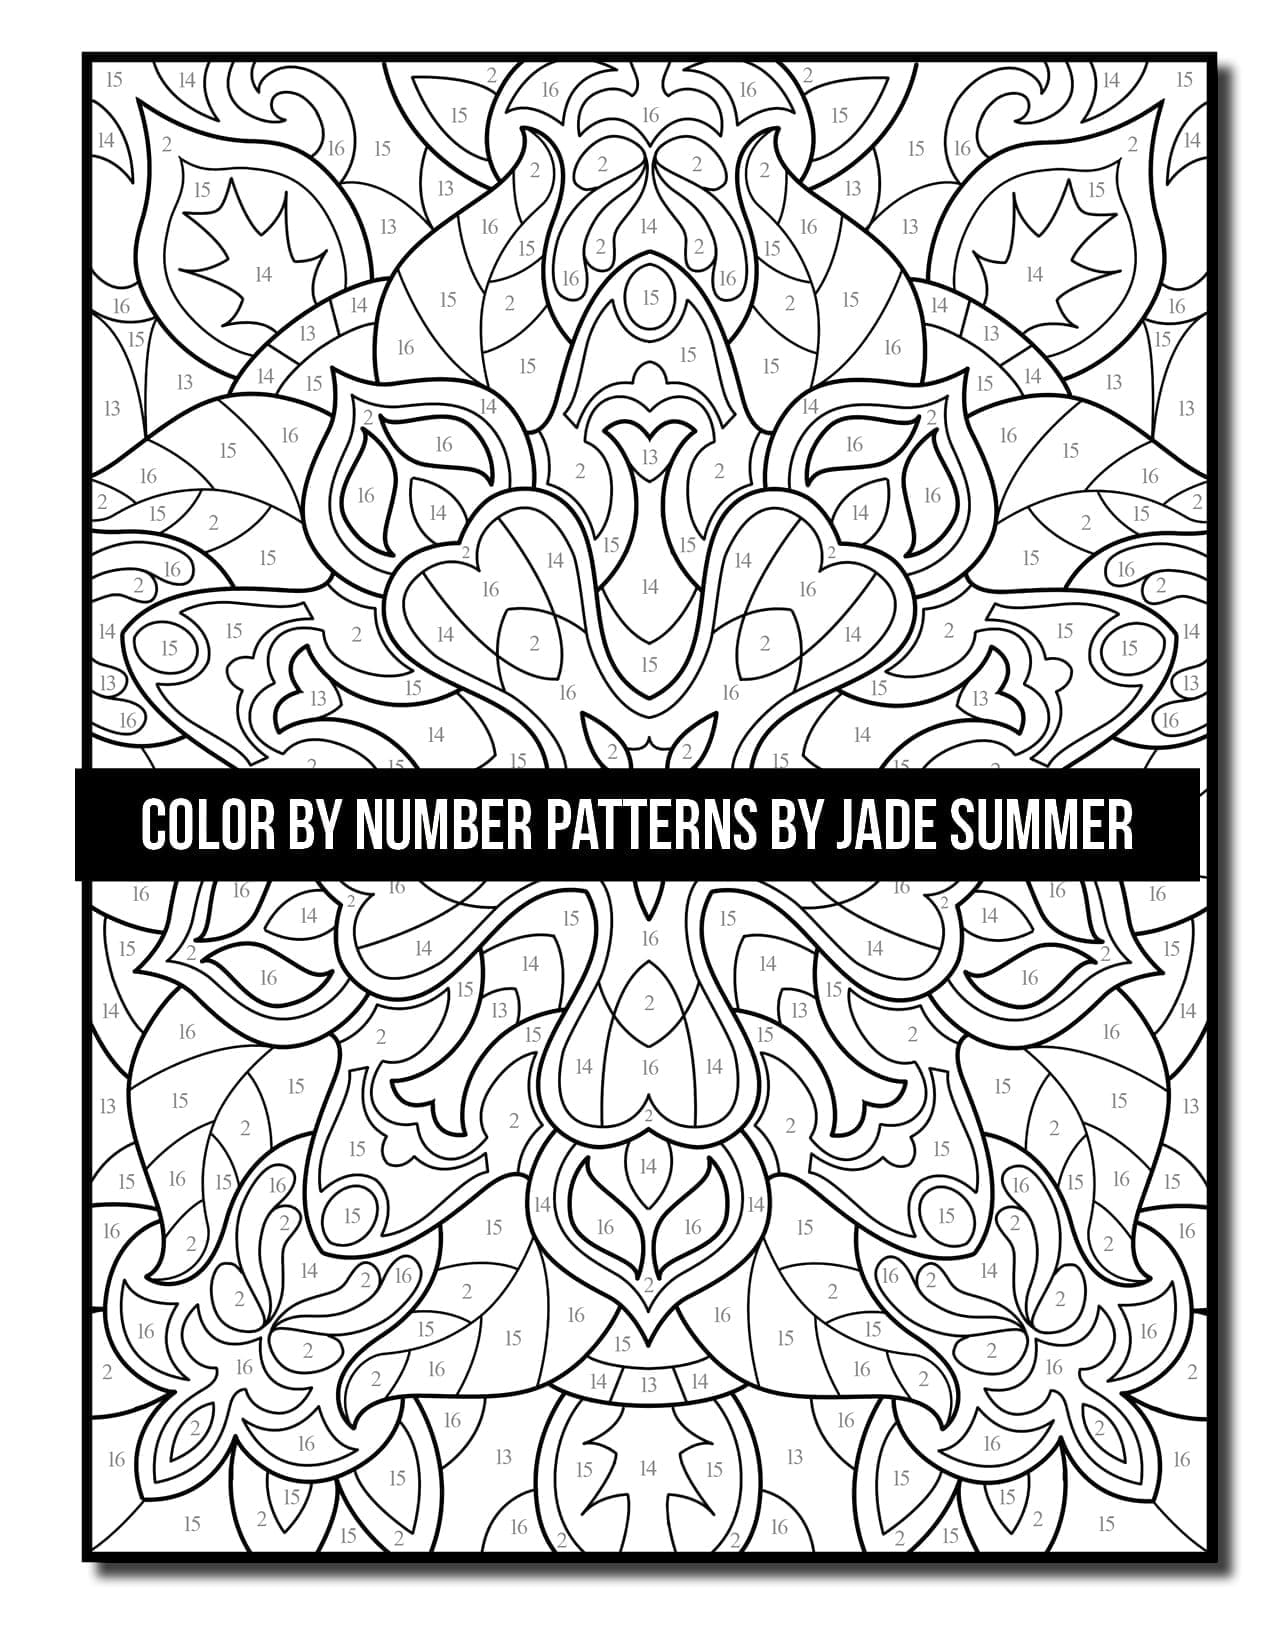 Color by number patterns coloring book jade summer